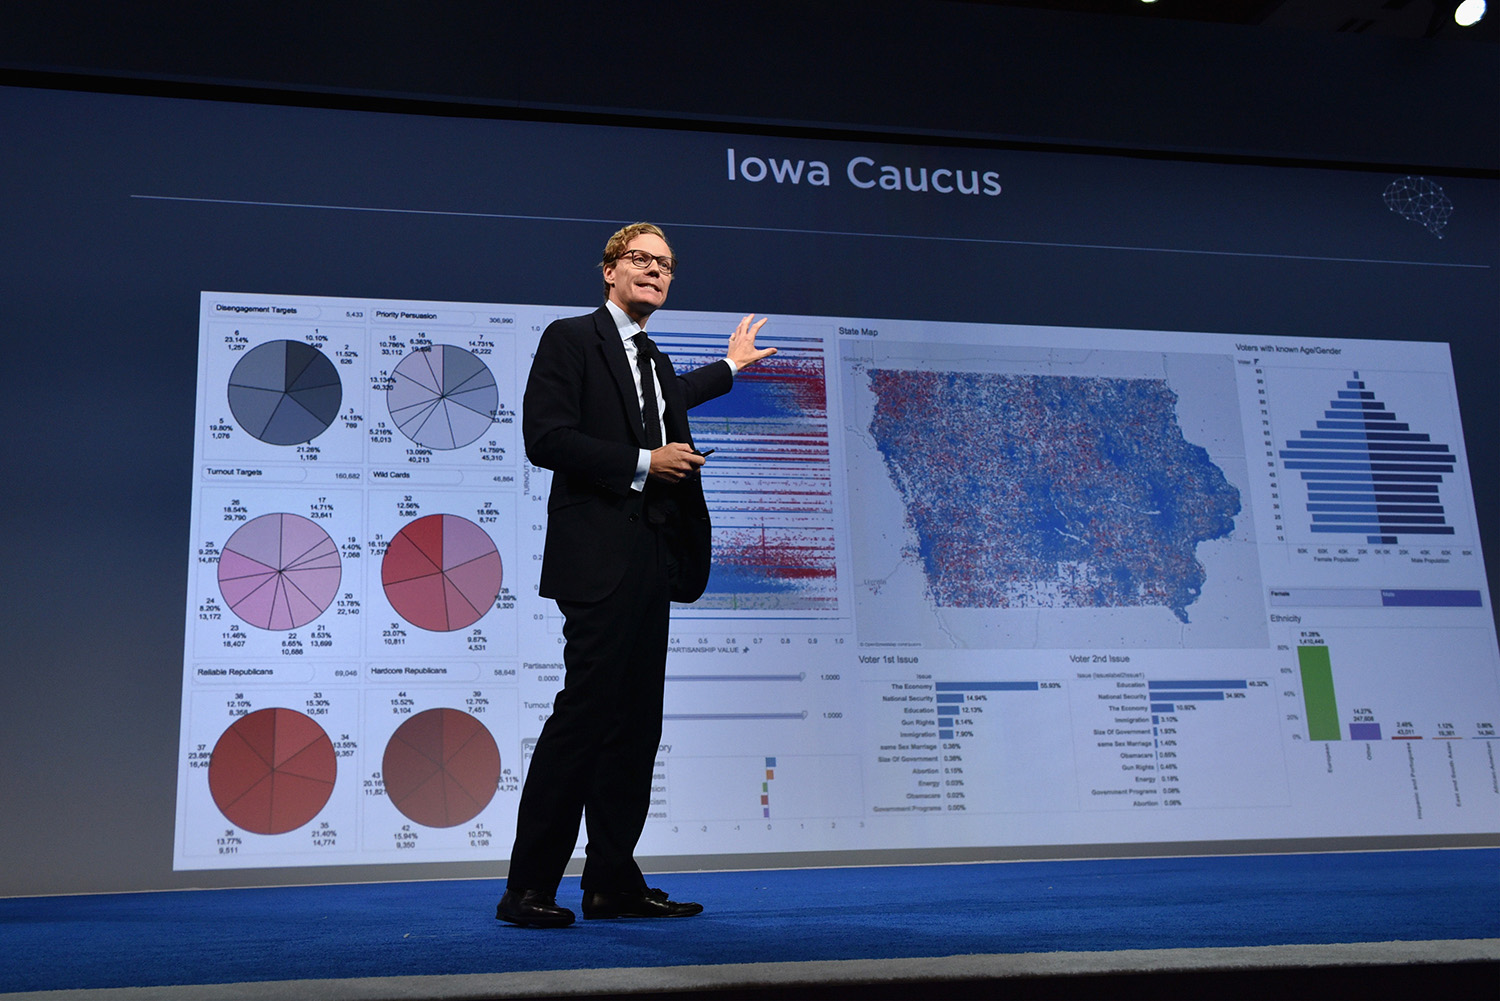 CEO of Cambridge Analytica Alexander Nix speaks at the 2016 Concordia Summit - Day 1 at Grand Hyatt New York on September 19, 2016 in New York City. (Bryan Bedder/Getty Images for Concordia Summit)